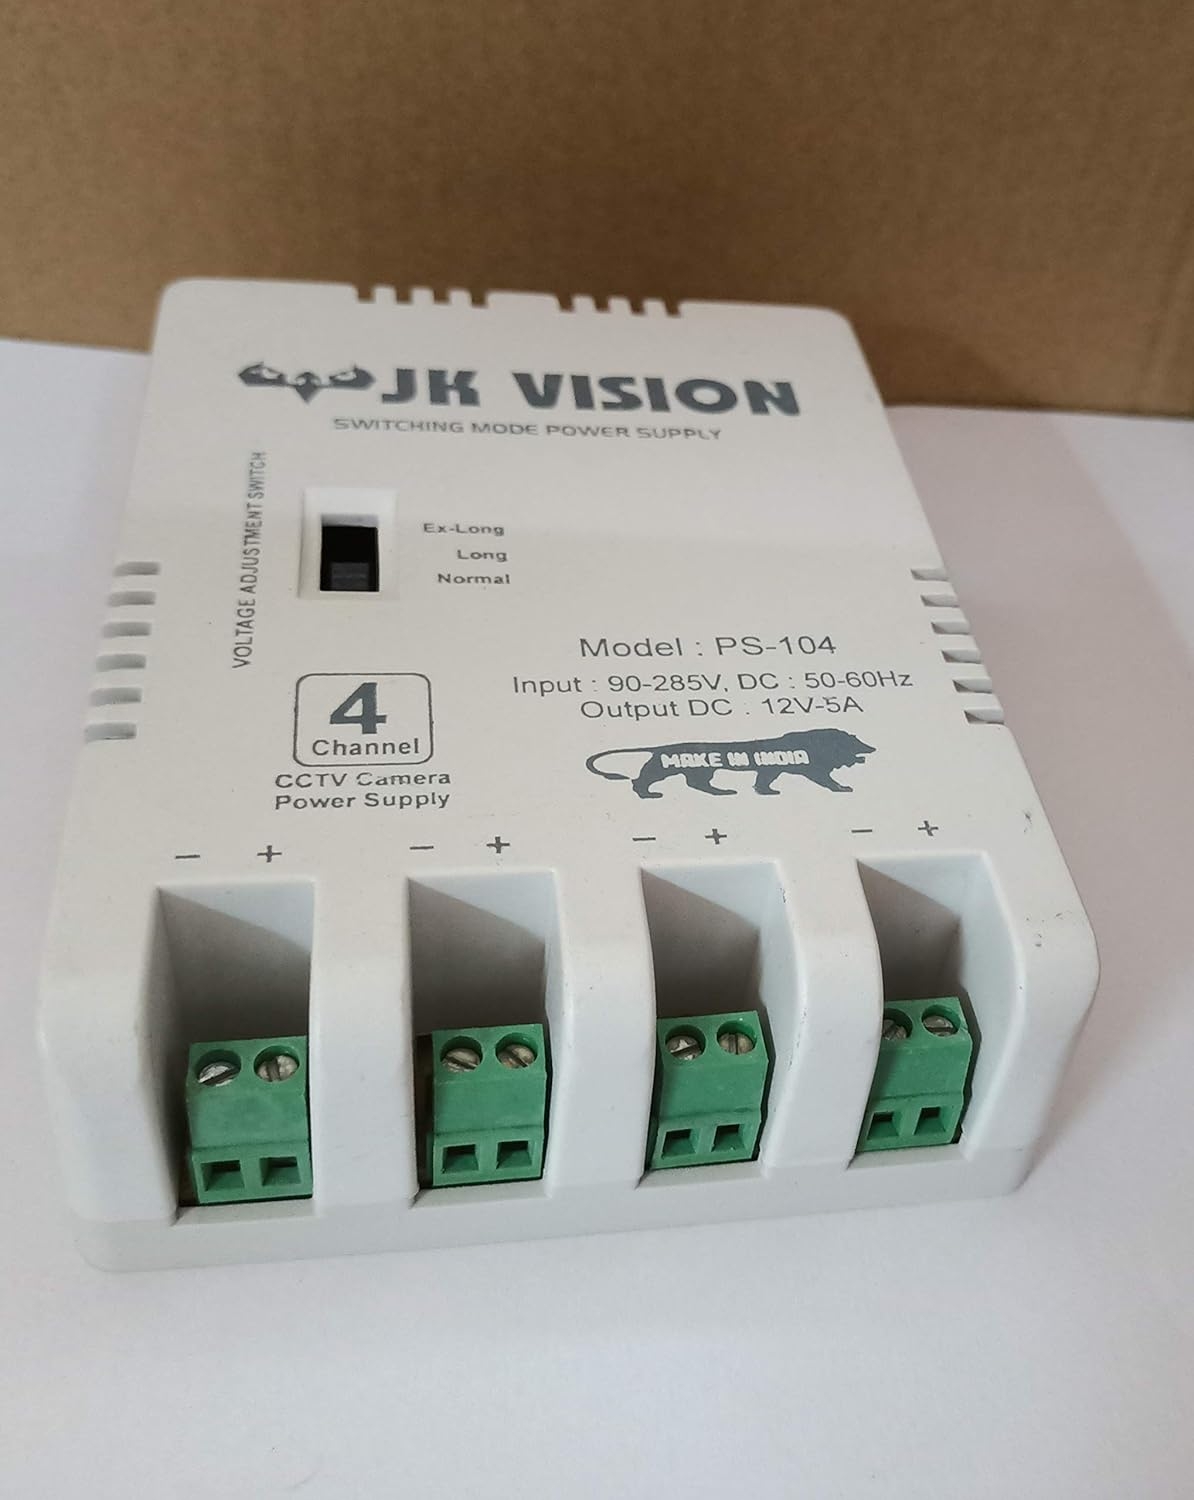 CCTV Power Supply 4 Channel for CP Plus, Hikvision, Dahua Camera & DVR (5 Amp)